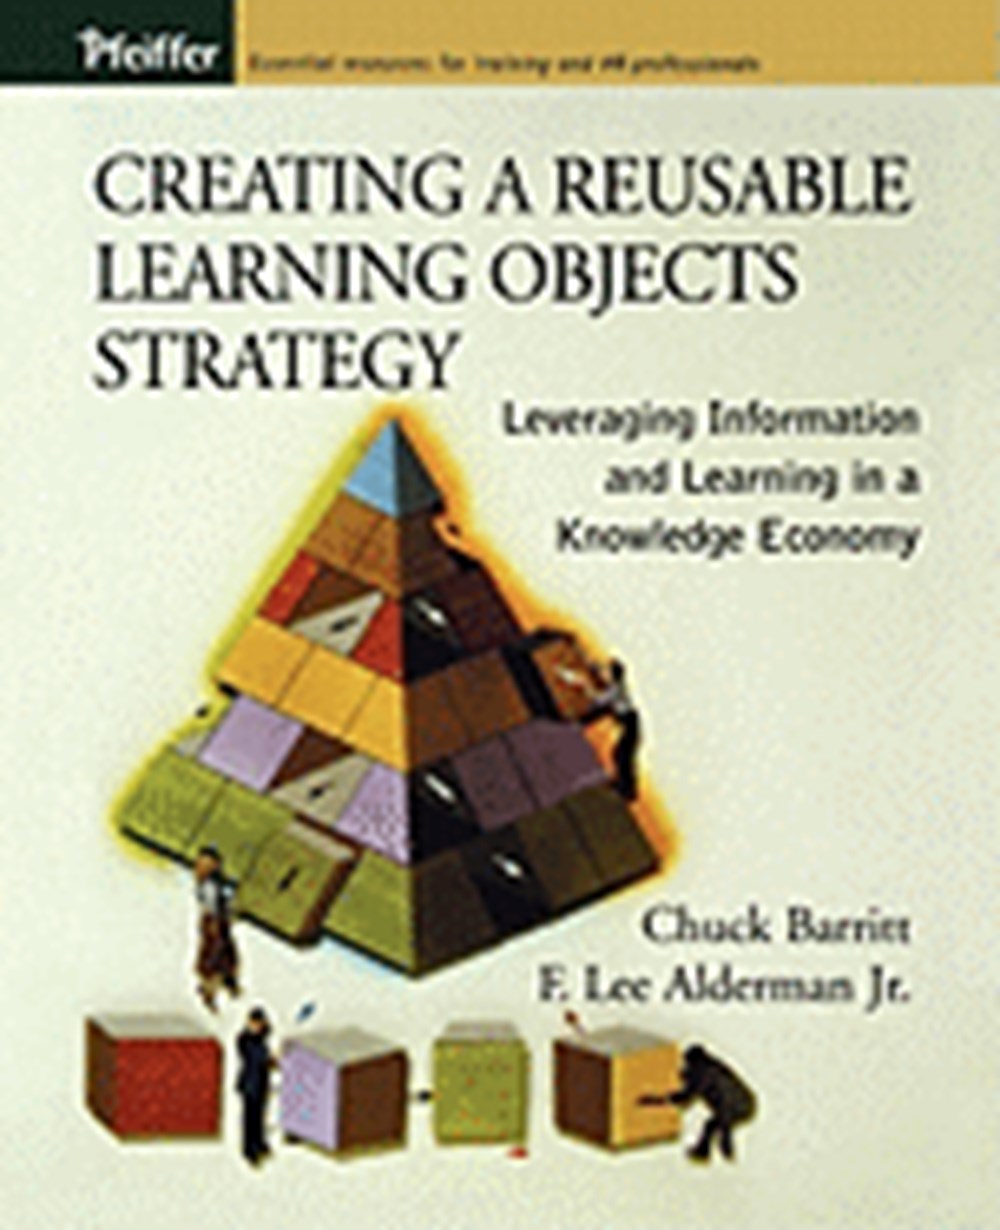 Creating a Reusable Learning Objects Strategy: Leveraging Information and Learning in a Knowledge Ec